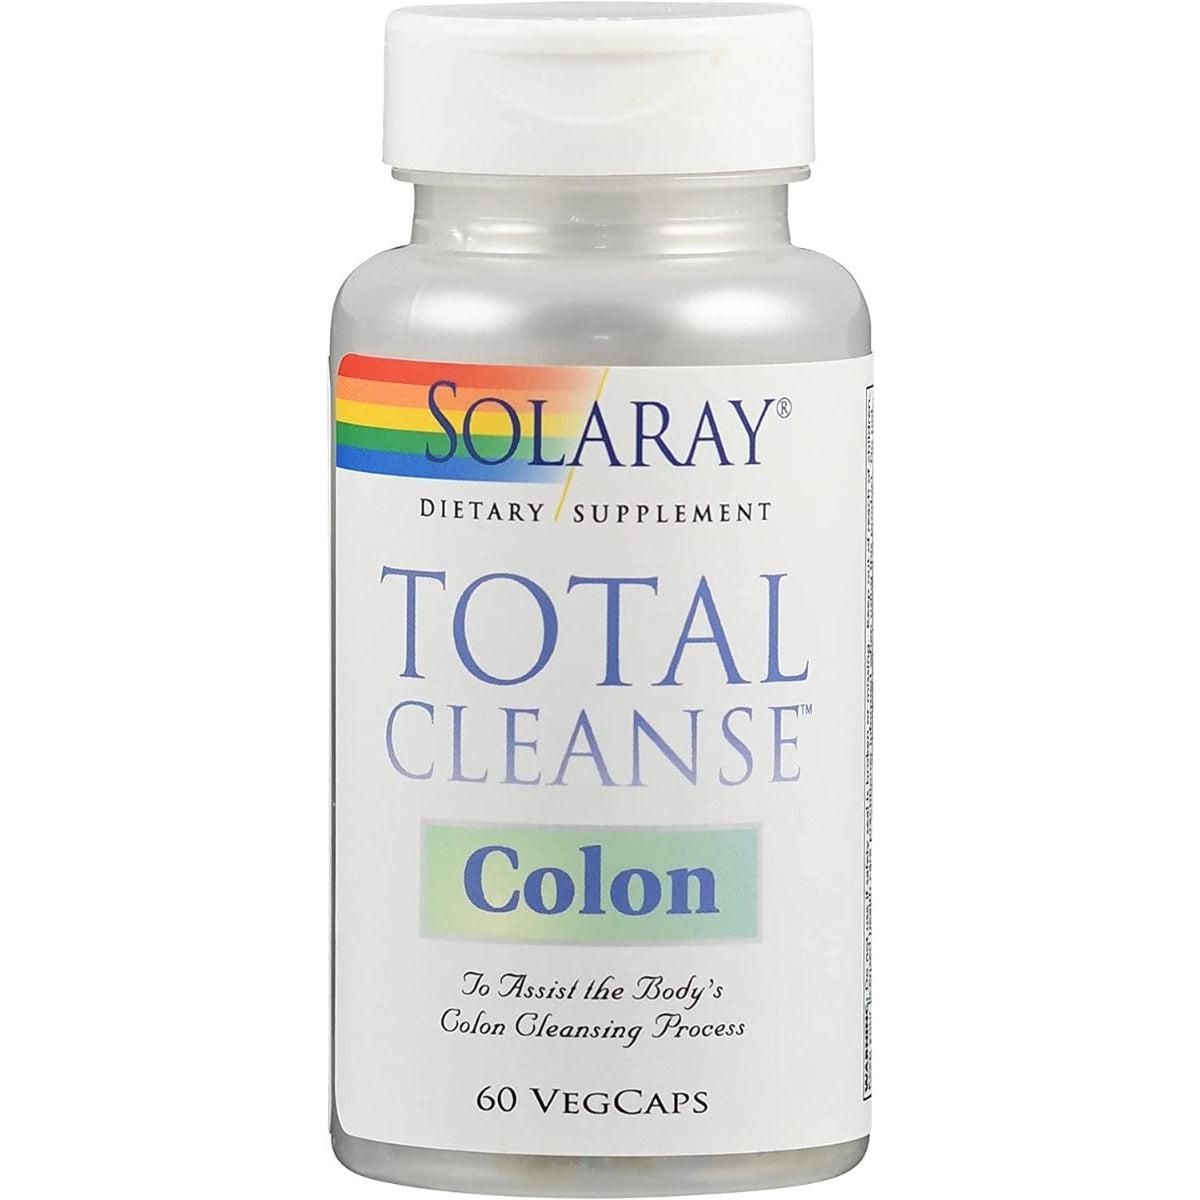 Solaray Total Cleanse Colon 60 Vegetable Capsules